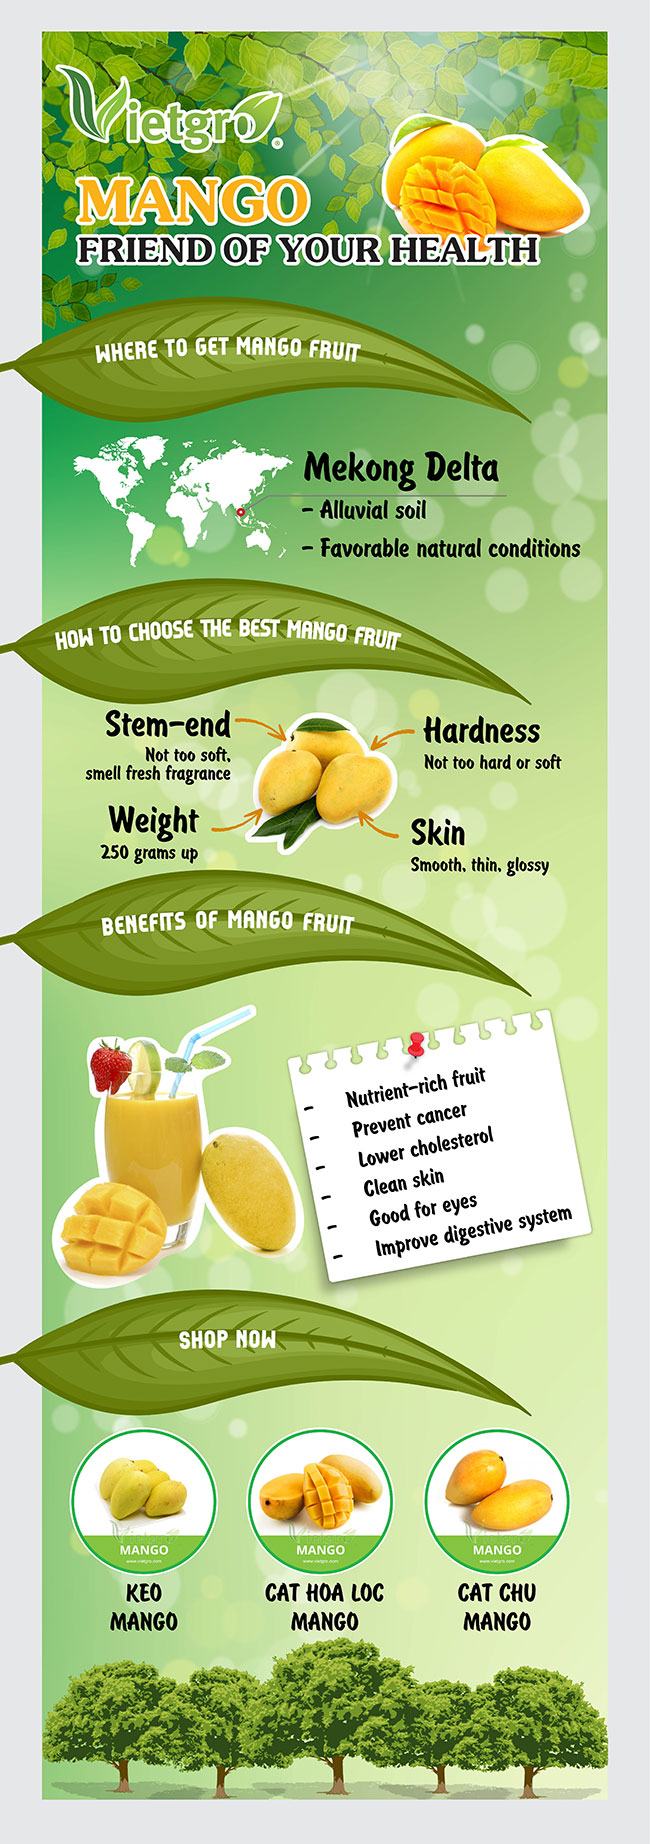 20160929_Pick_Mango_Now_for_Various_Benefits